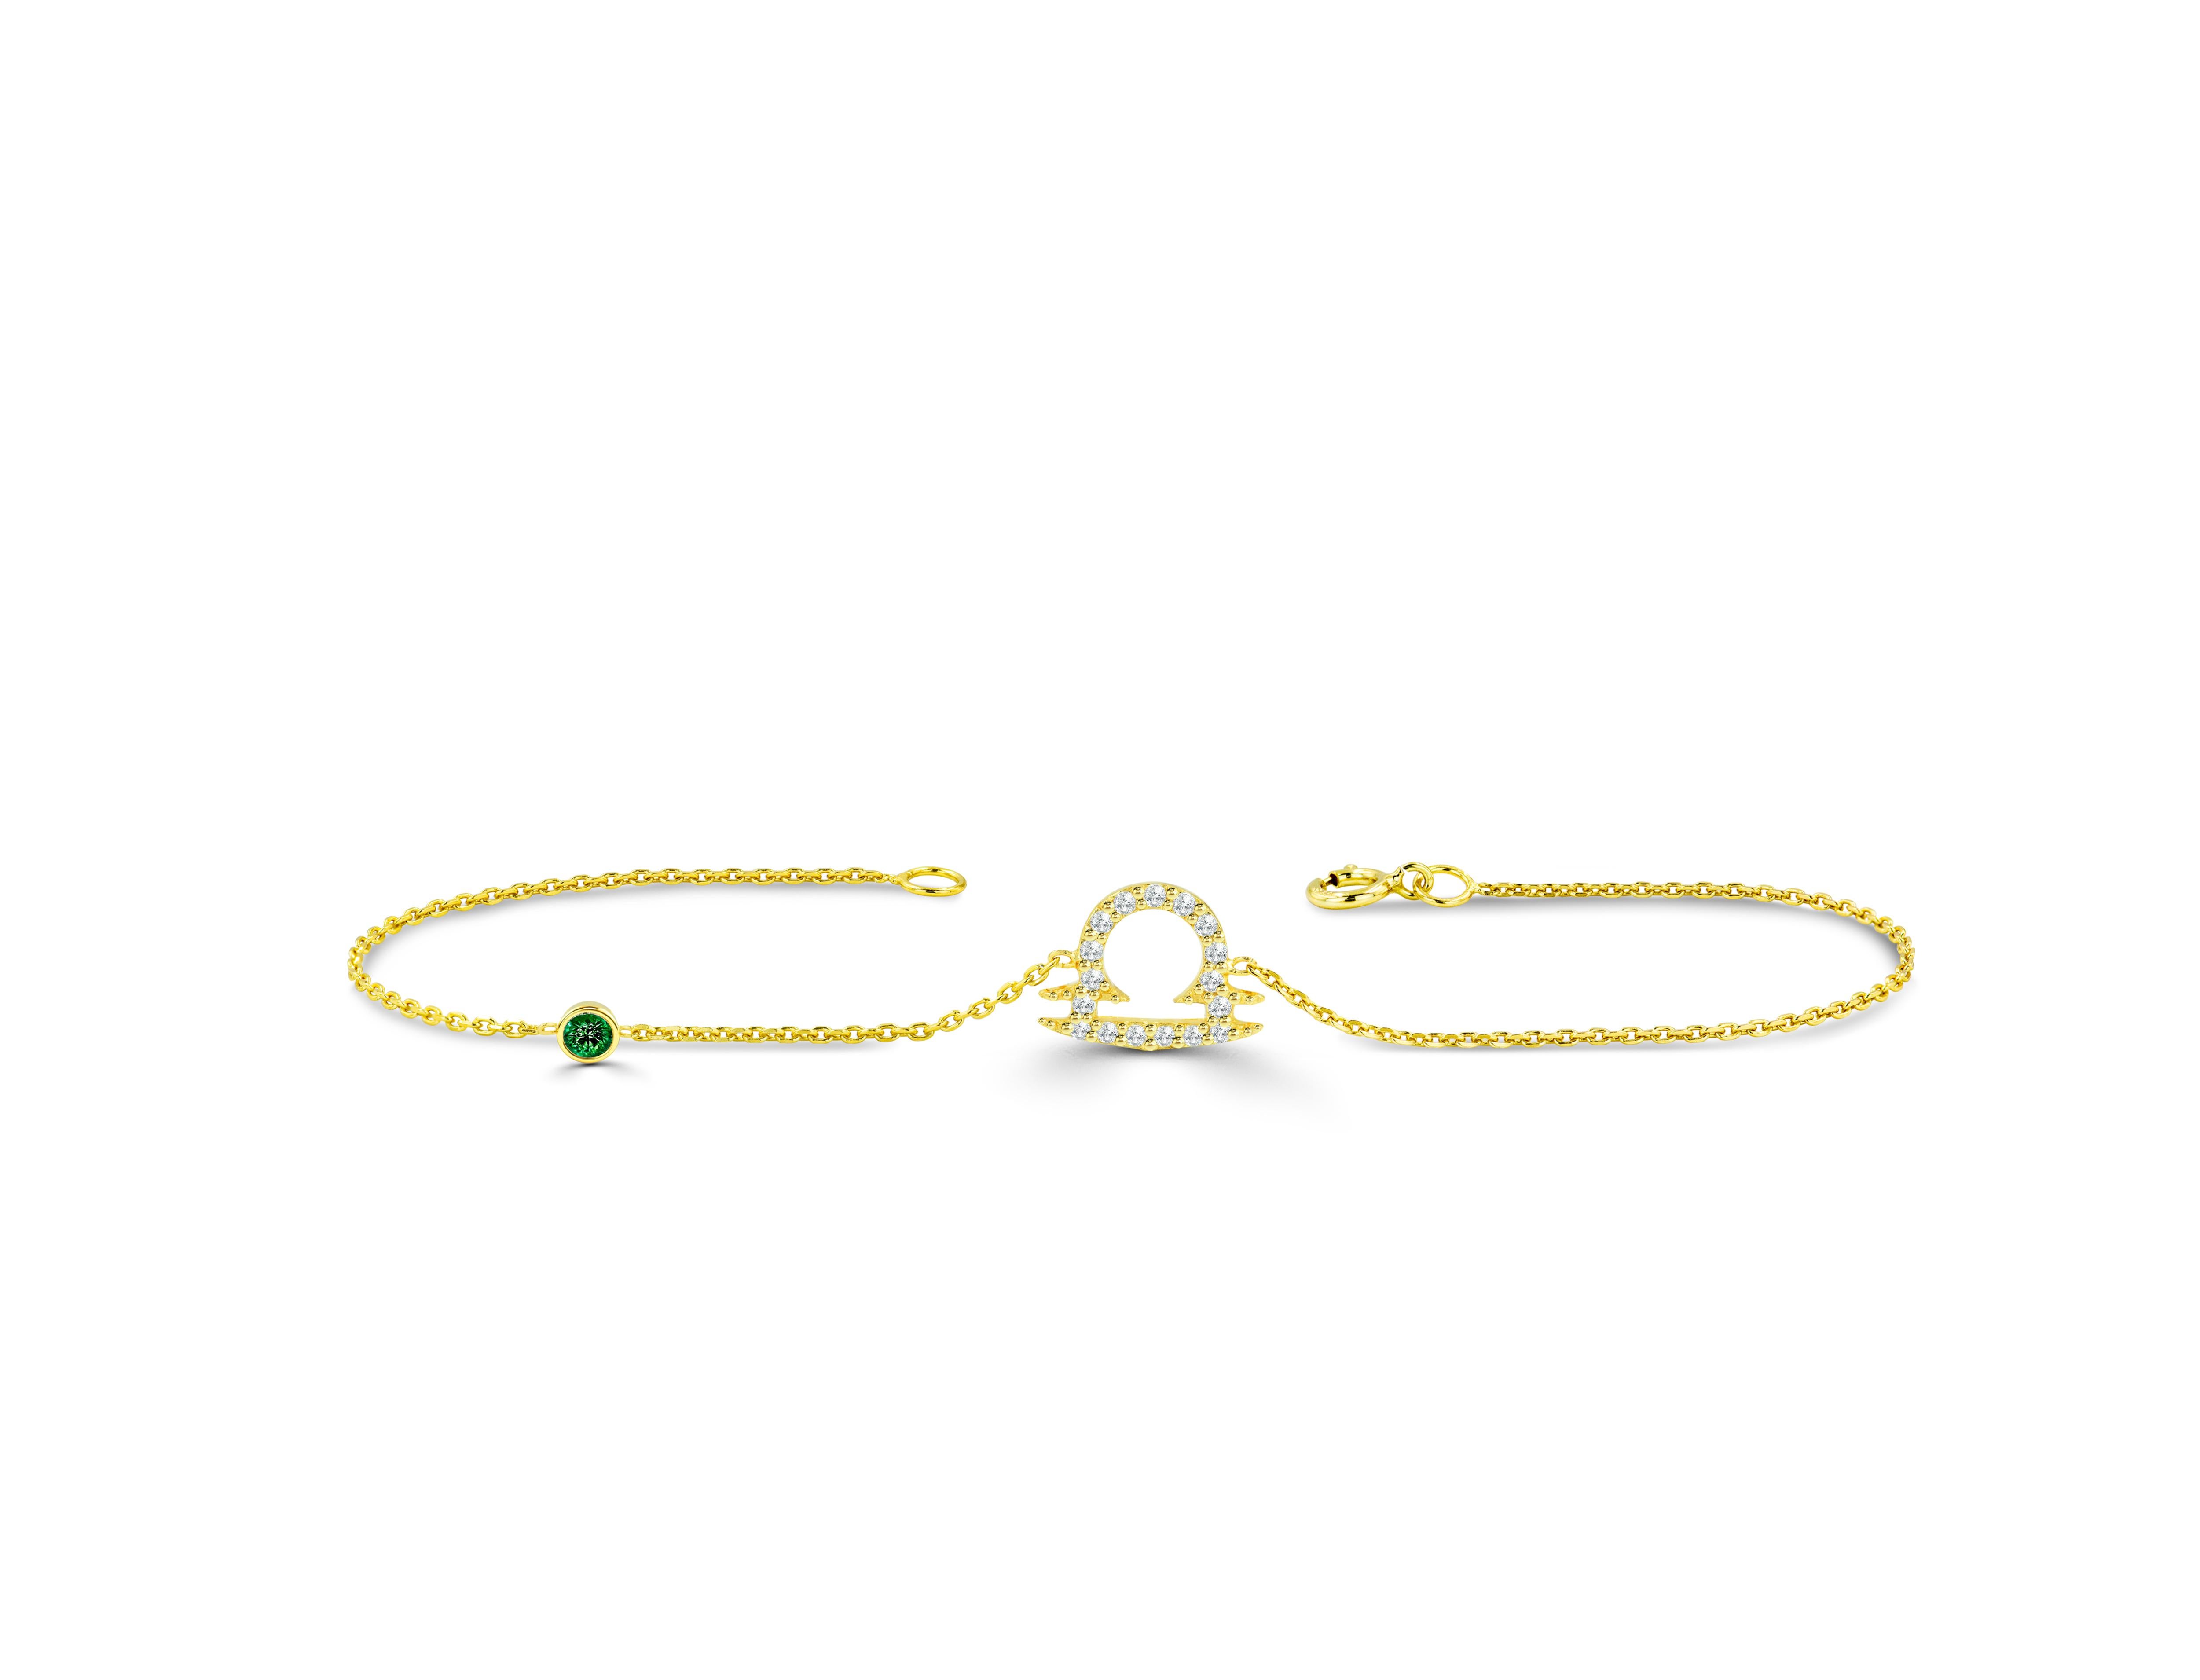 This Libra Diamond Bracelet is meant to represent you. This Zodiac sign bracelet comes with a birthstone of your choice- Ruby, Sapphire, or Emerald. Our collection of zodiac jewelry includes this stunning Diamond Libra Bracelet. All Leos out there,